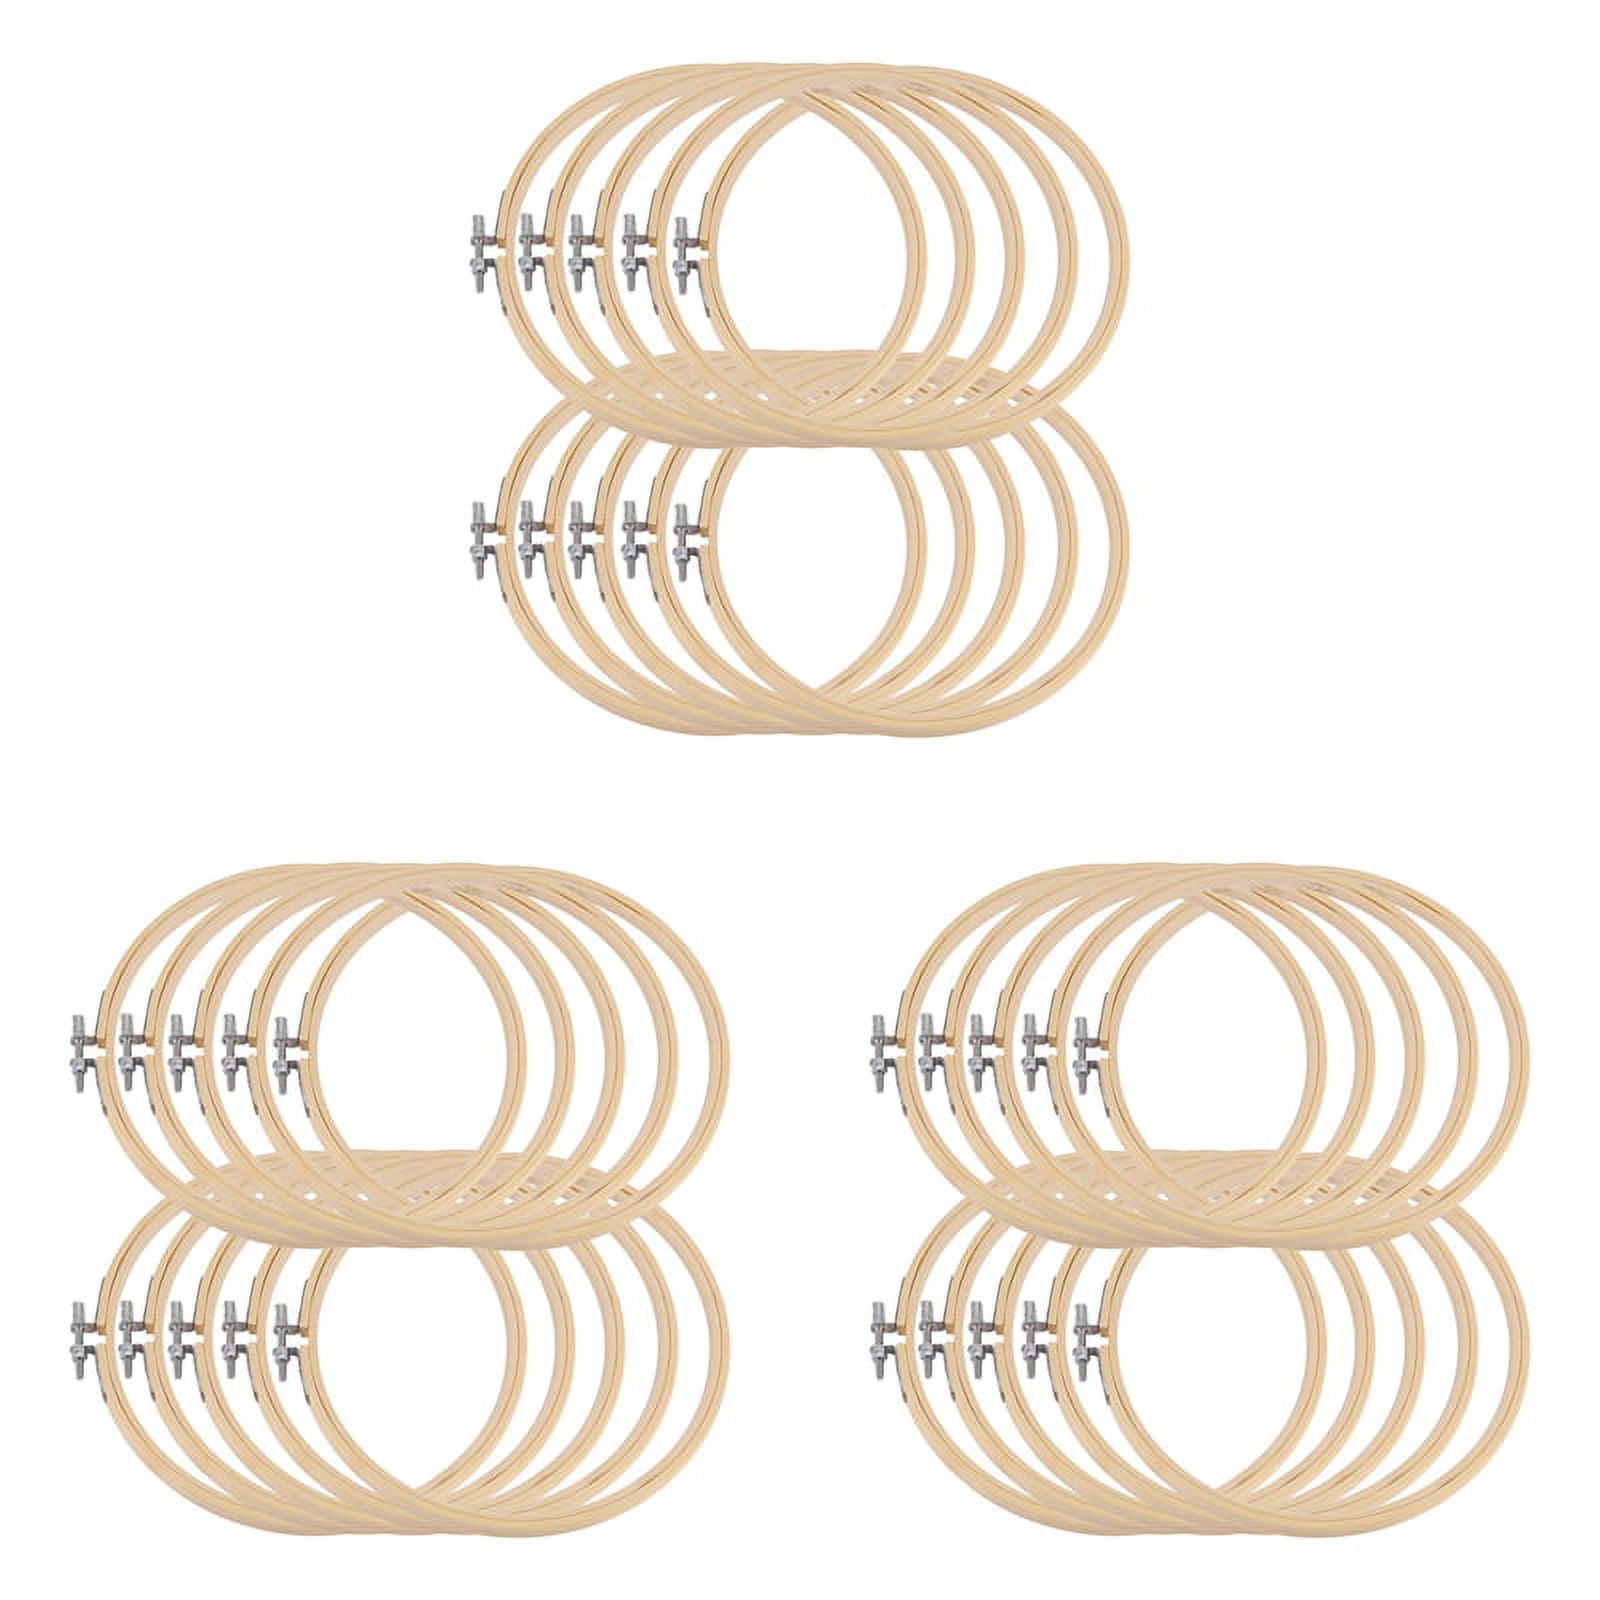 8 Pieces 7 Inch Embroidery Hoops Wooden Round Adjustable Bamboo